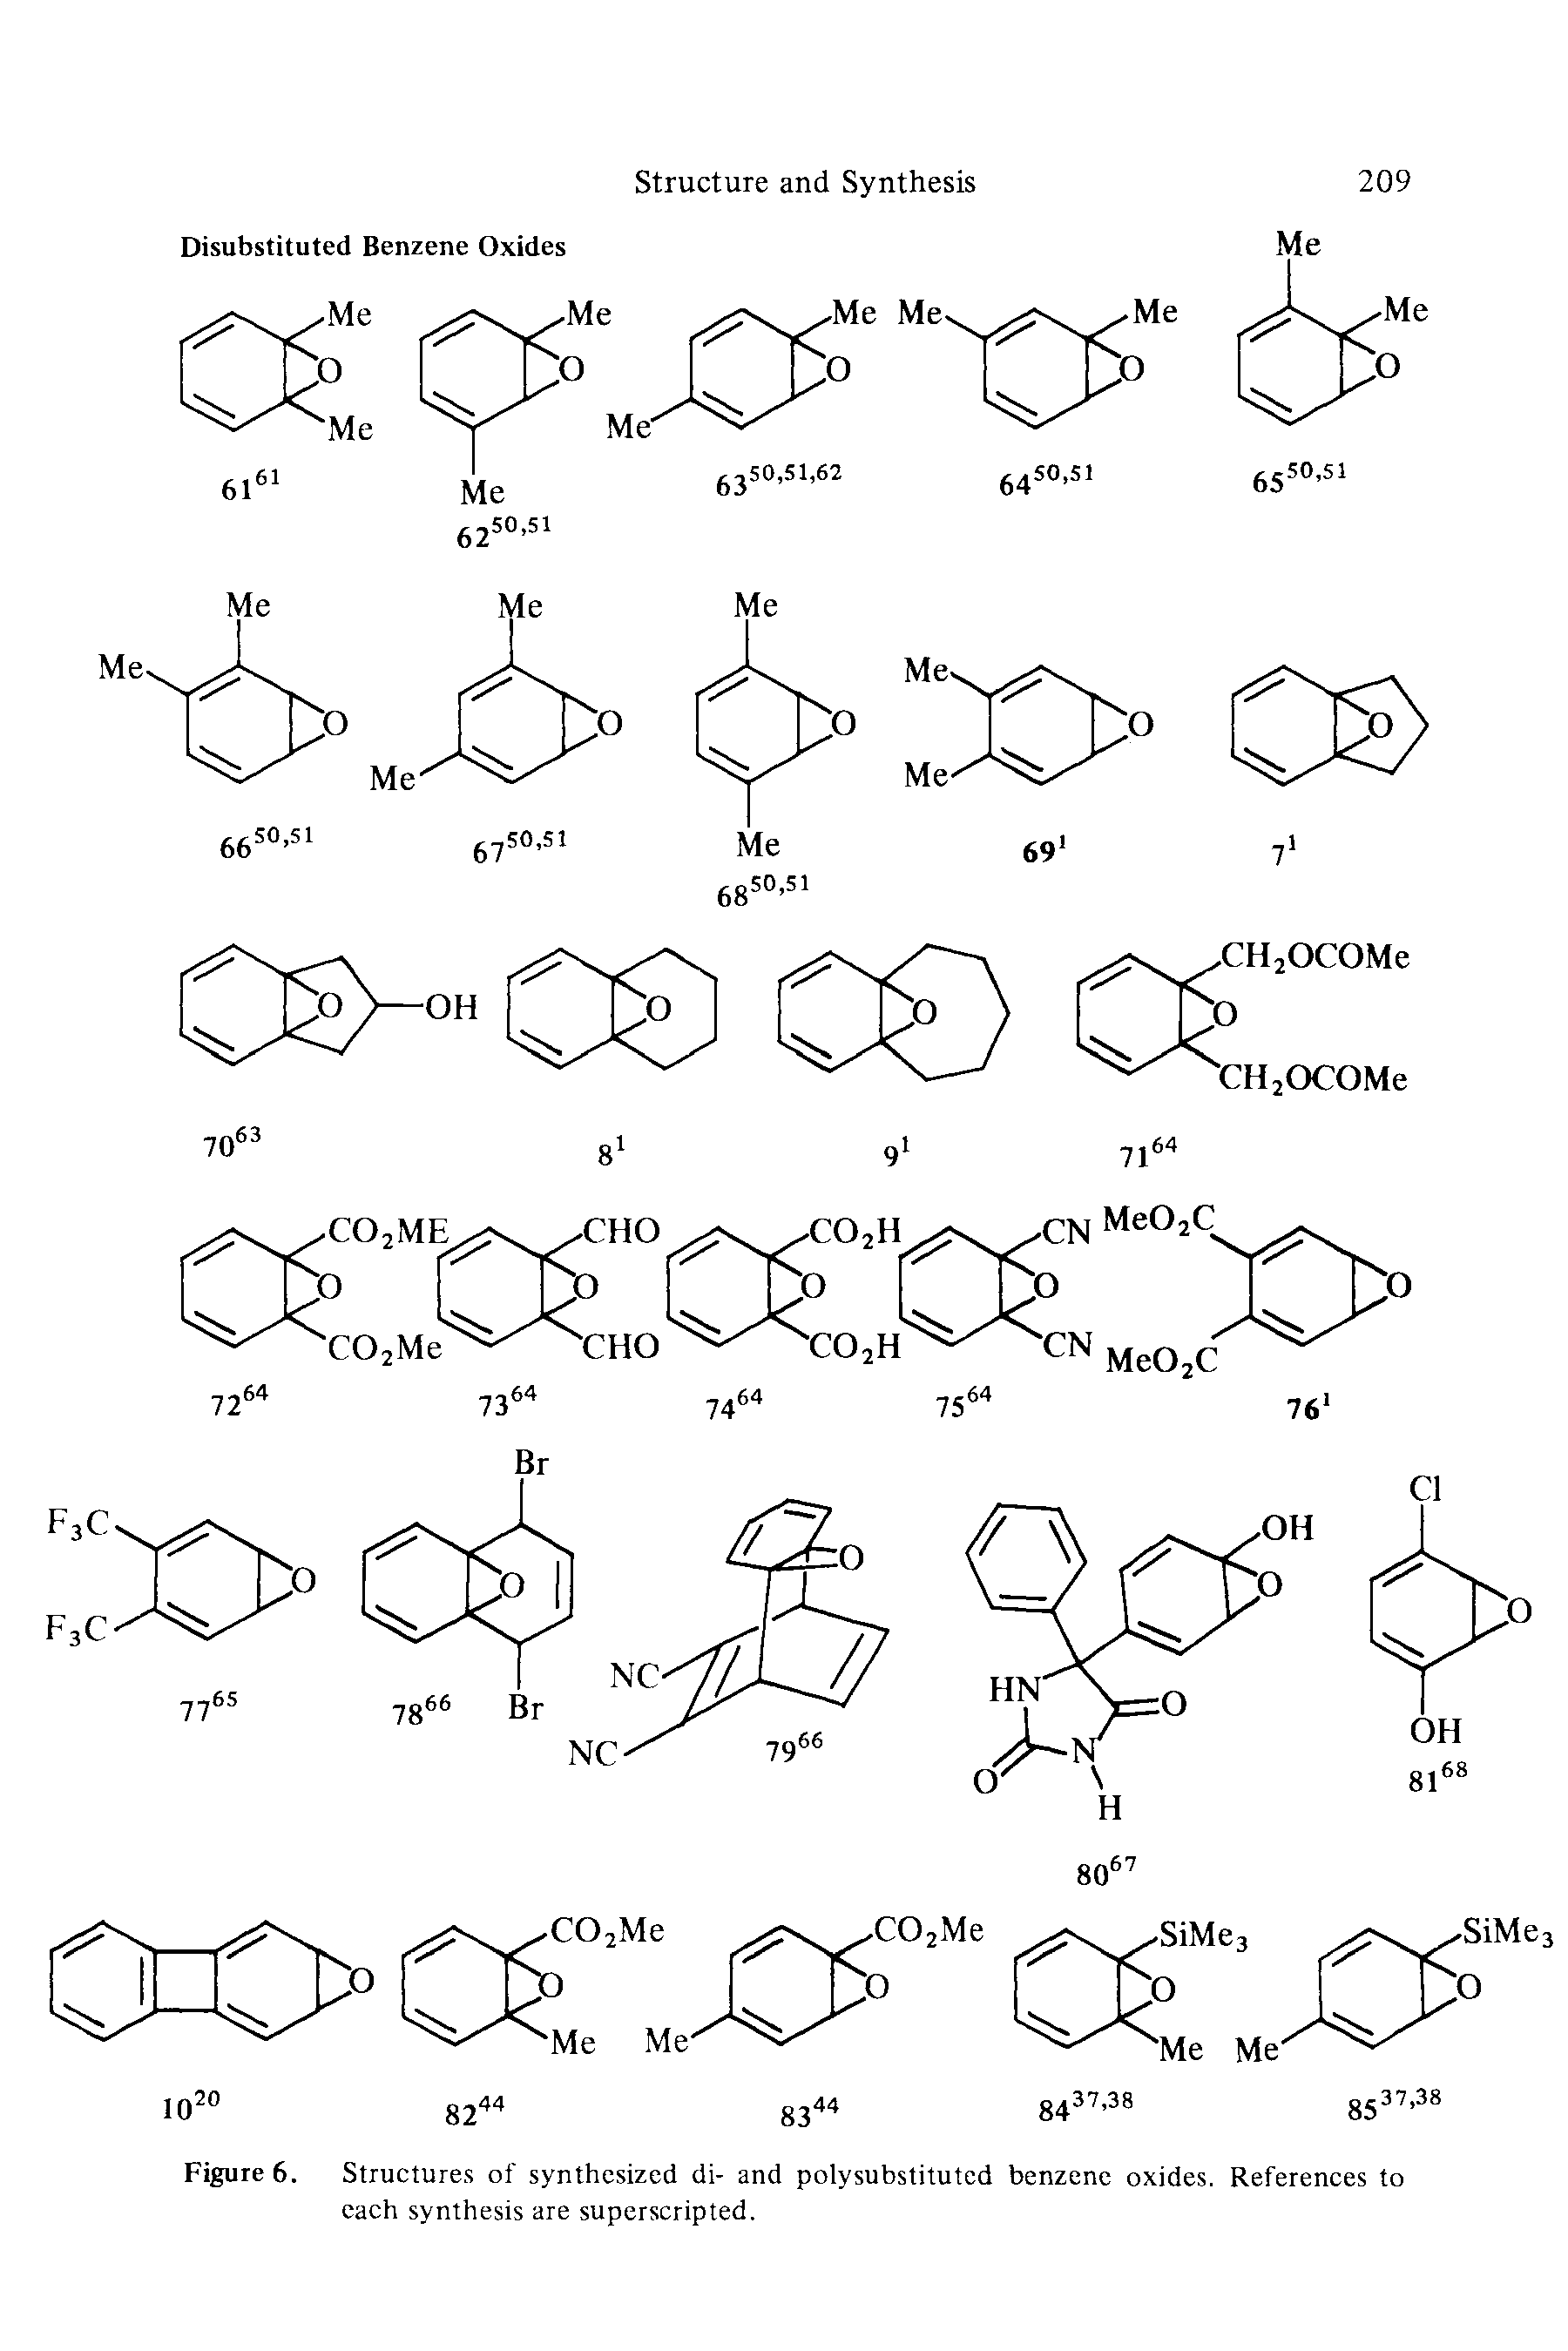 Figure 6. Structures of synthesized di- and polysubstituted benzene oxides. References to each synthesis are superscripted.